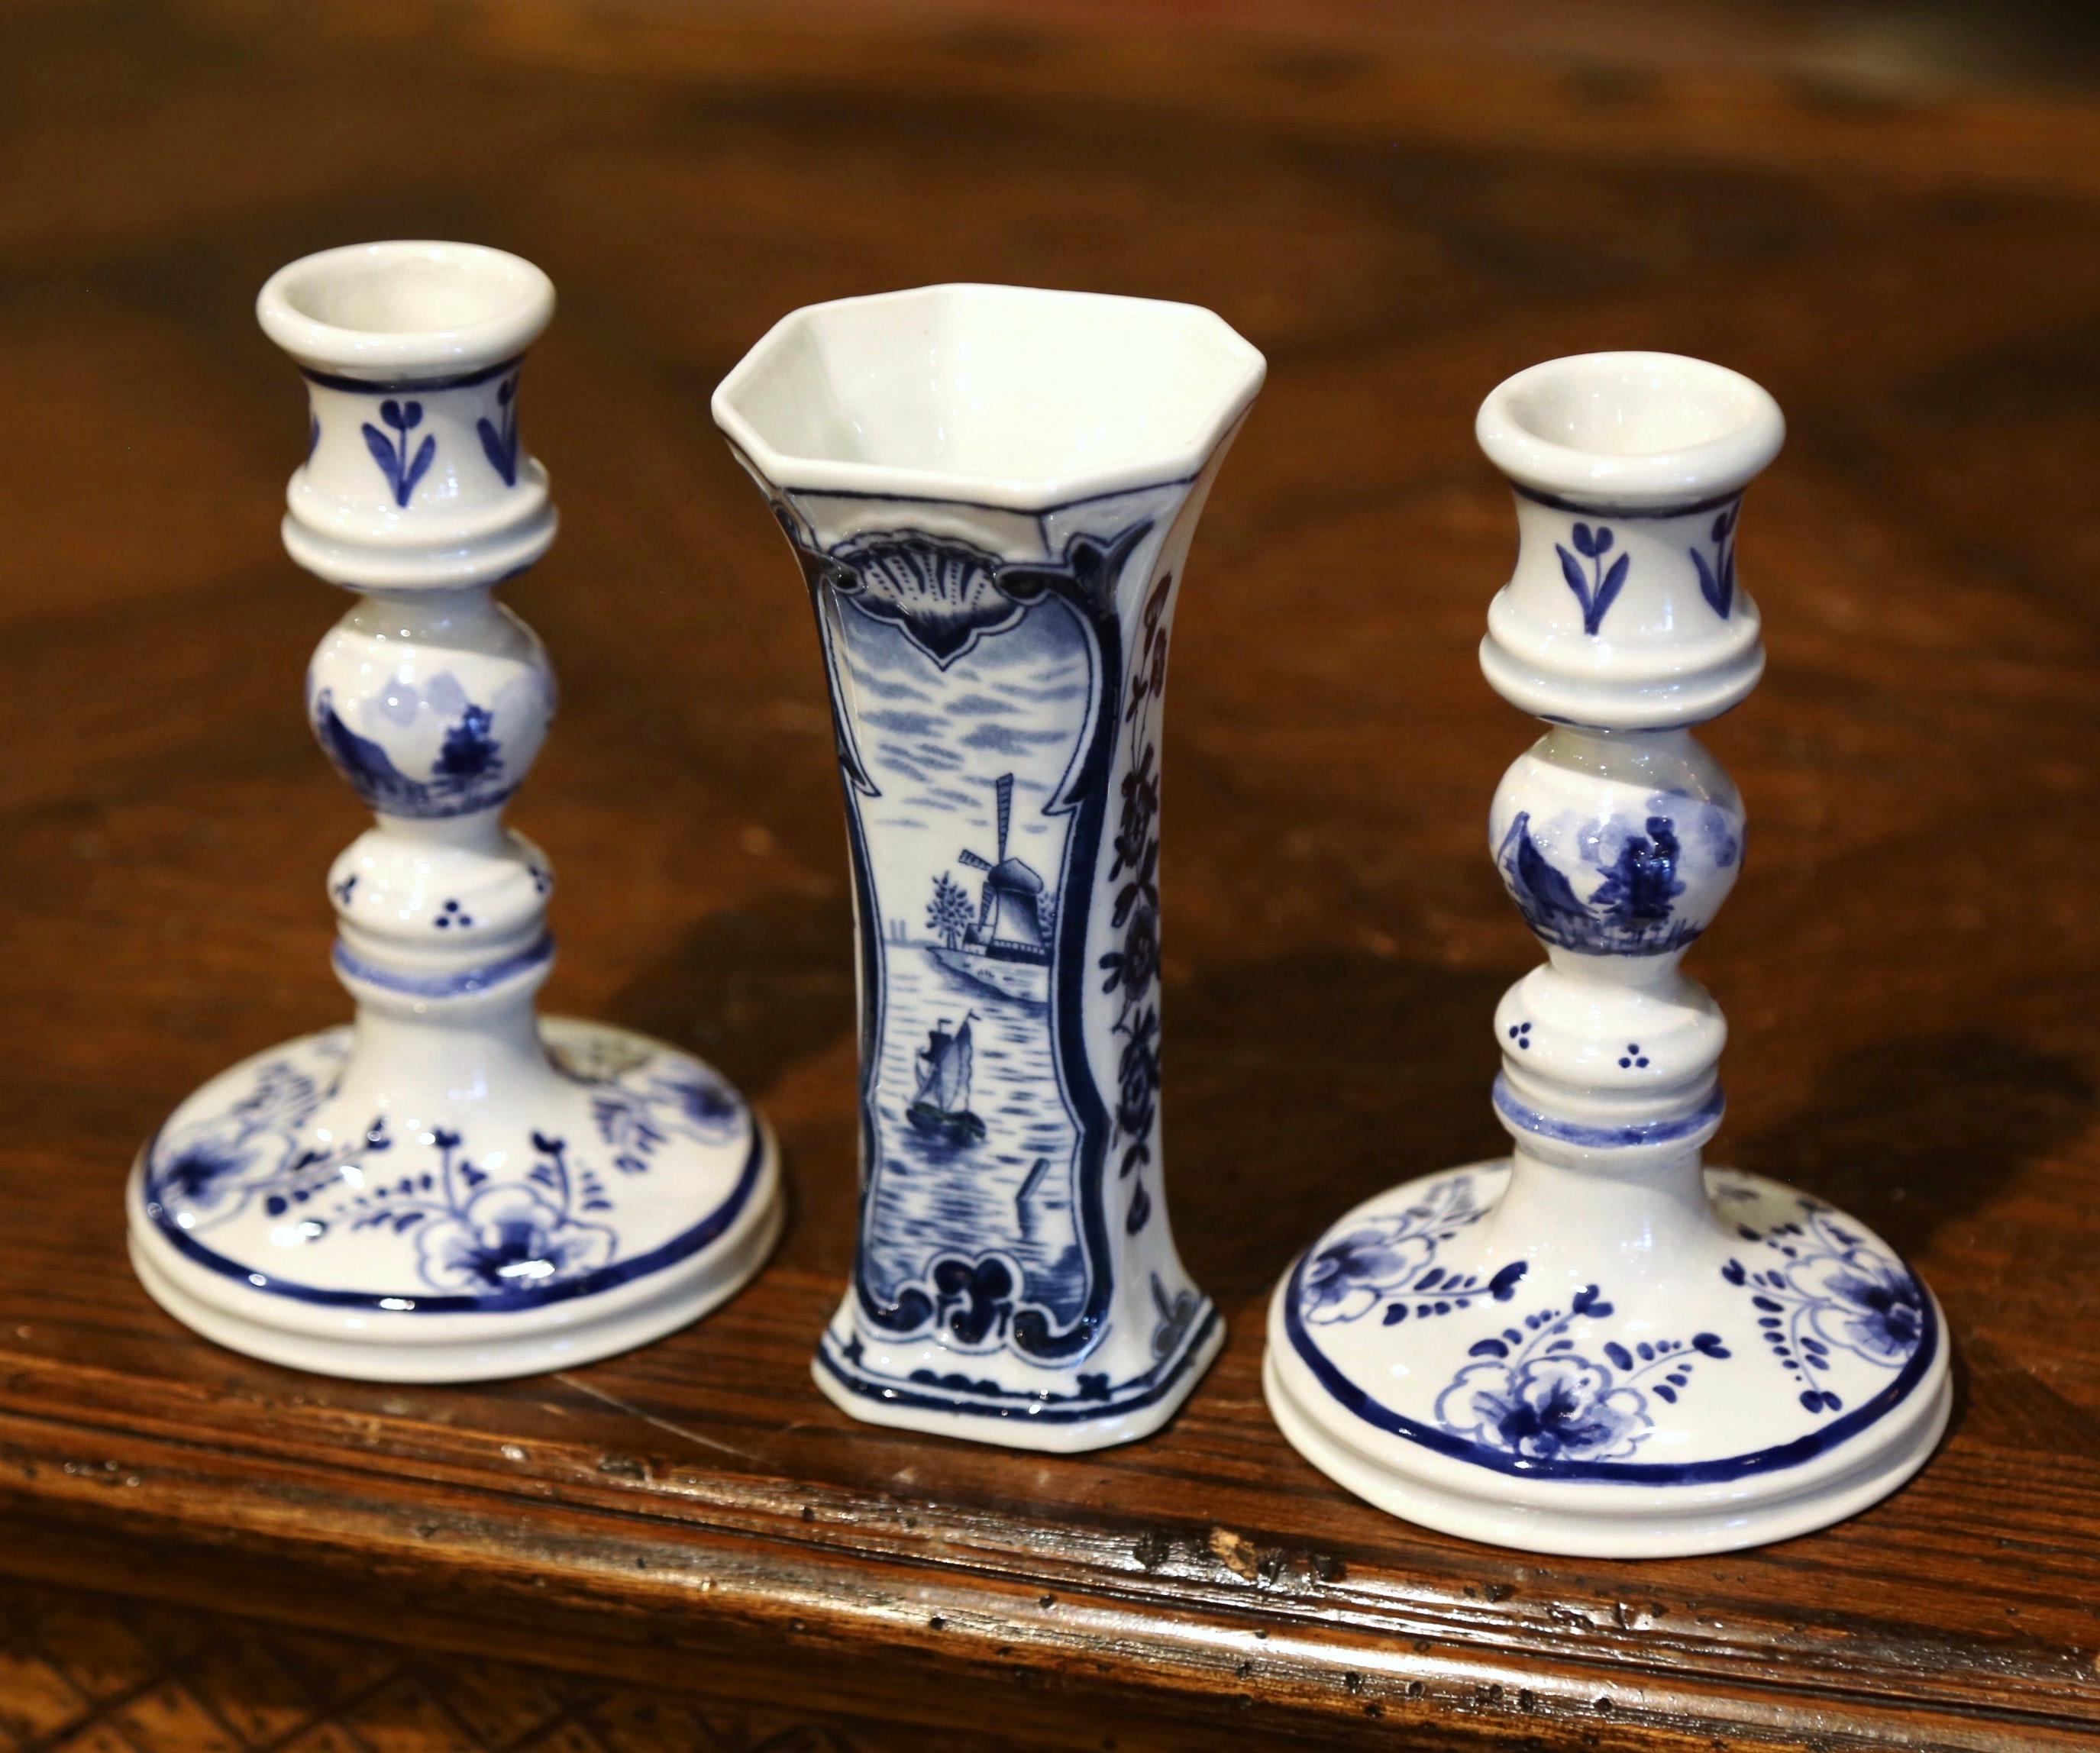 Decorate a shelf with this three-piece ceramic set. Crafted in Holland circa 1980, the set includes a pair of candlesticks and vase decorated with floral motifs and embellished with the traditional sailboat and windmill decor. All three pieces are